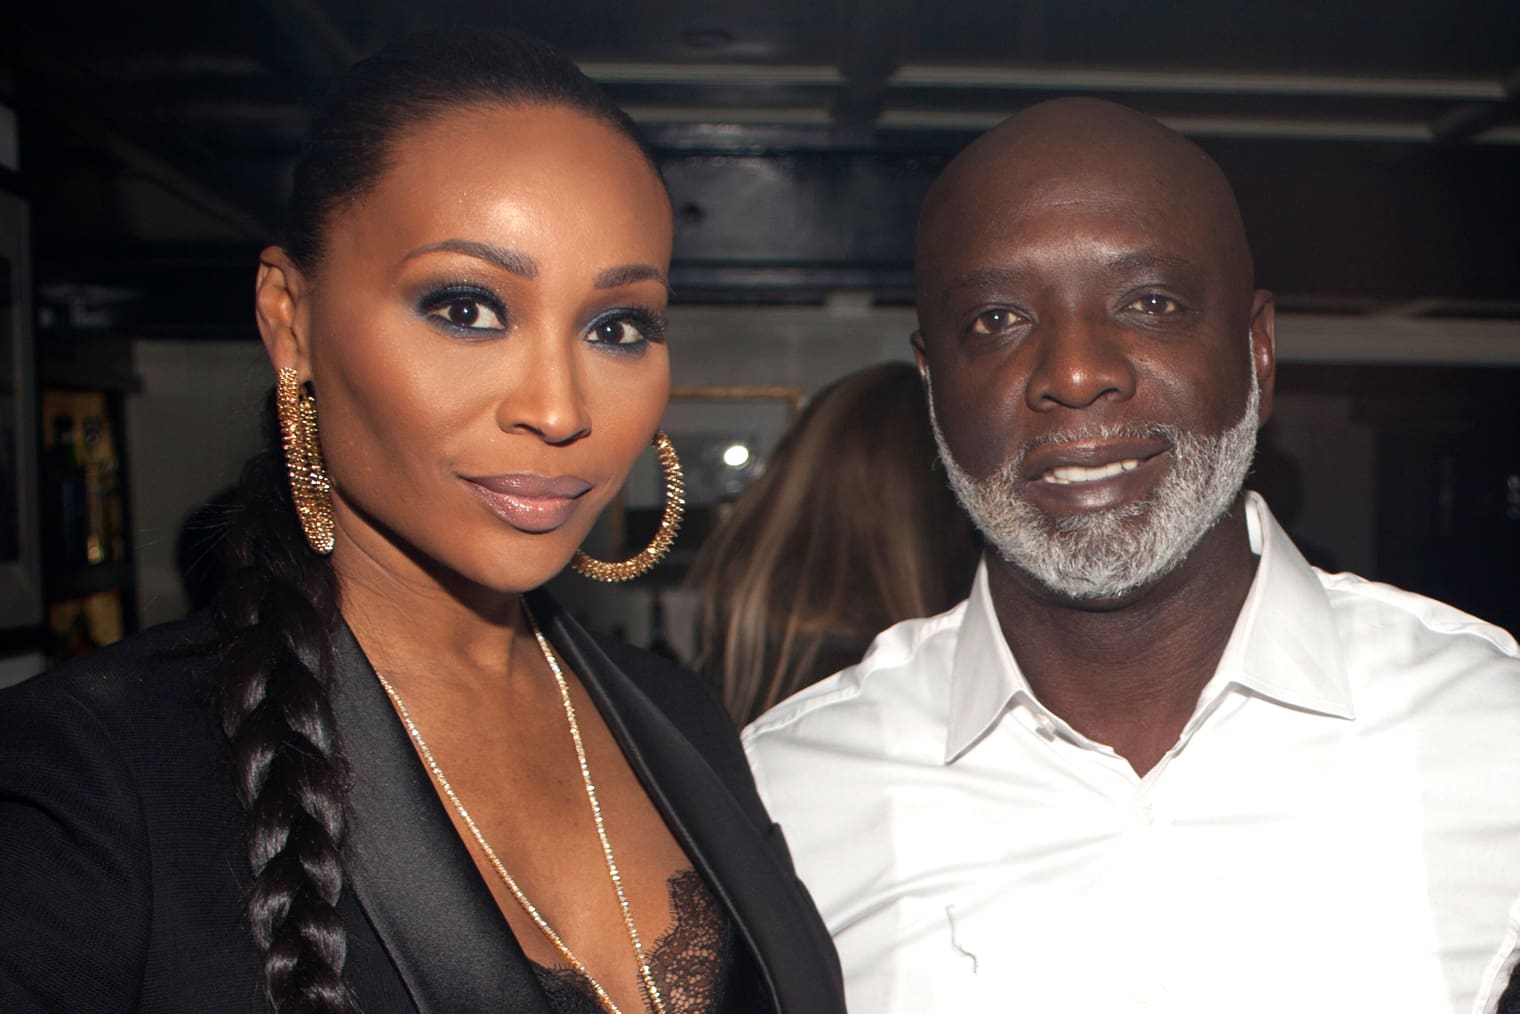 Cynthia Bailey Talks About Beauty And Class - Check Out The Message She Shared